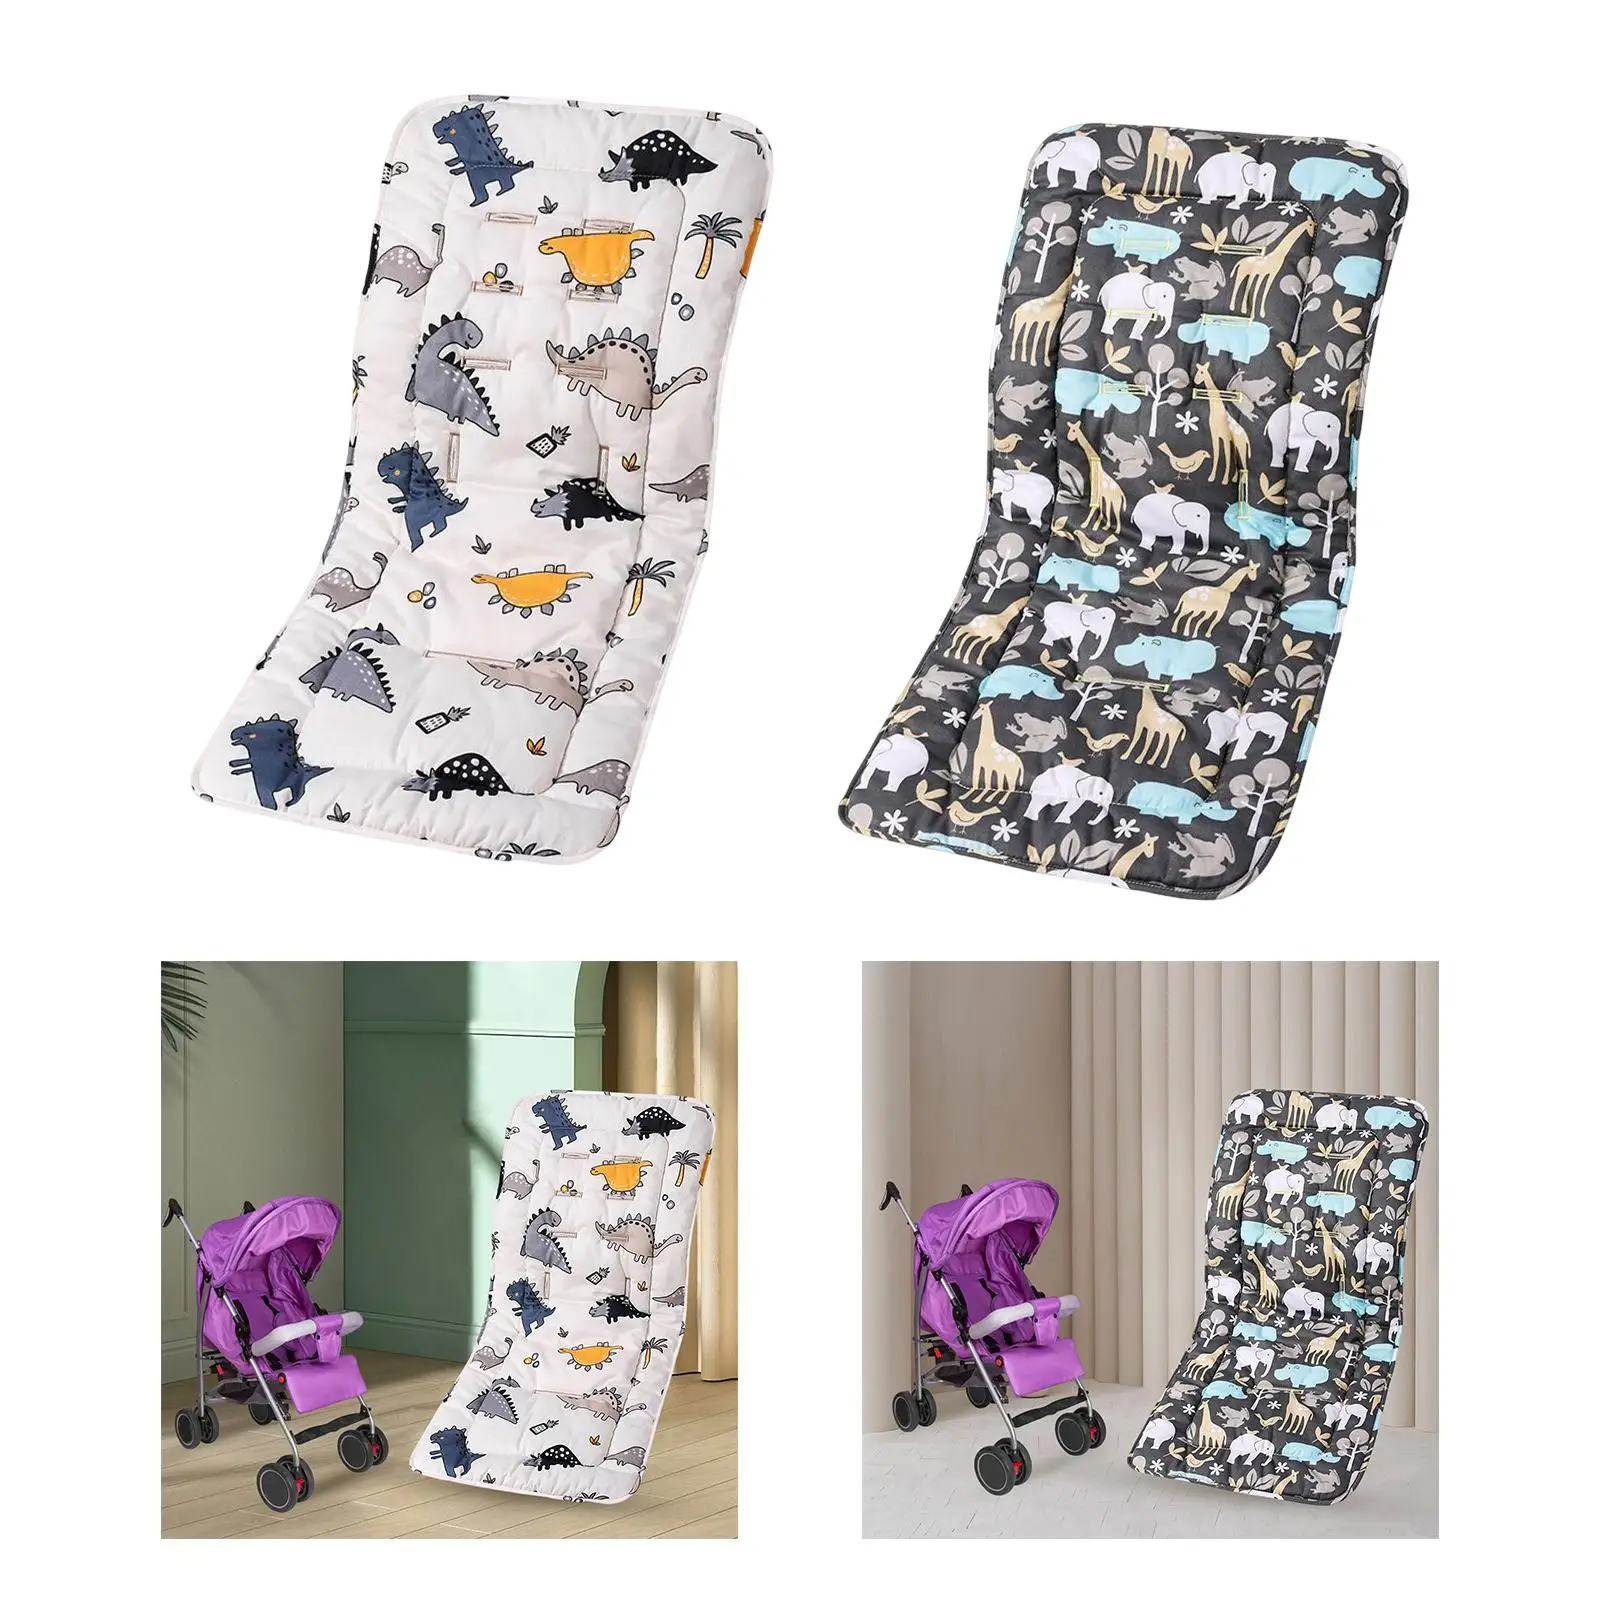 Baby Carriage Cushion Non Slip Cushion Seat Liners Thicken Liner Mat Trolley Mattress Comfortable for Buggy Pram Accessories